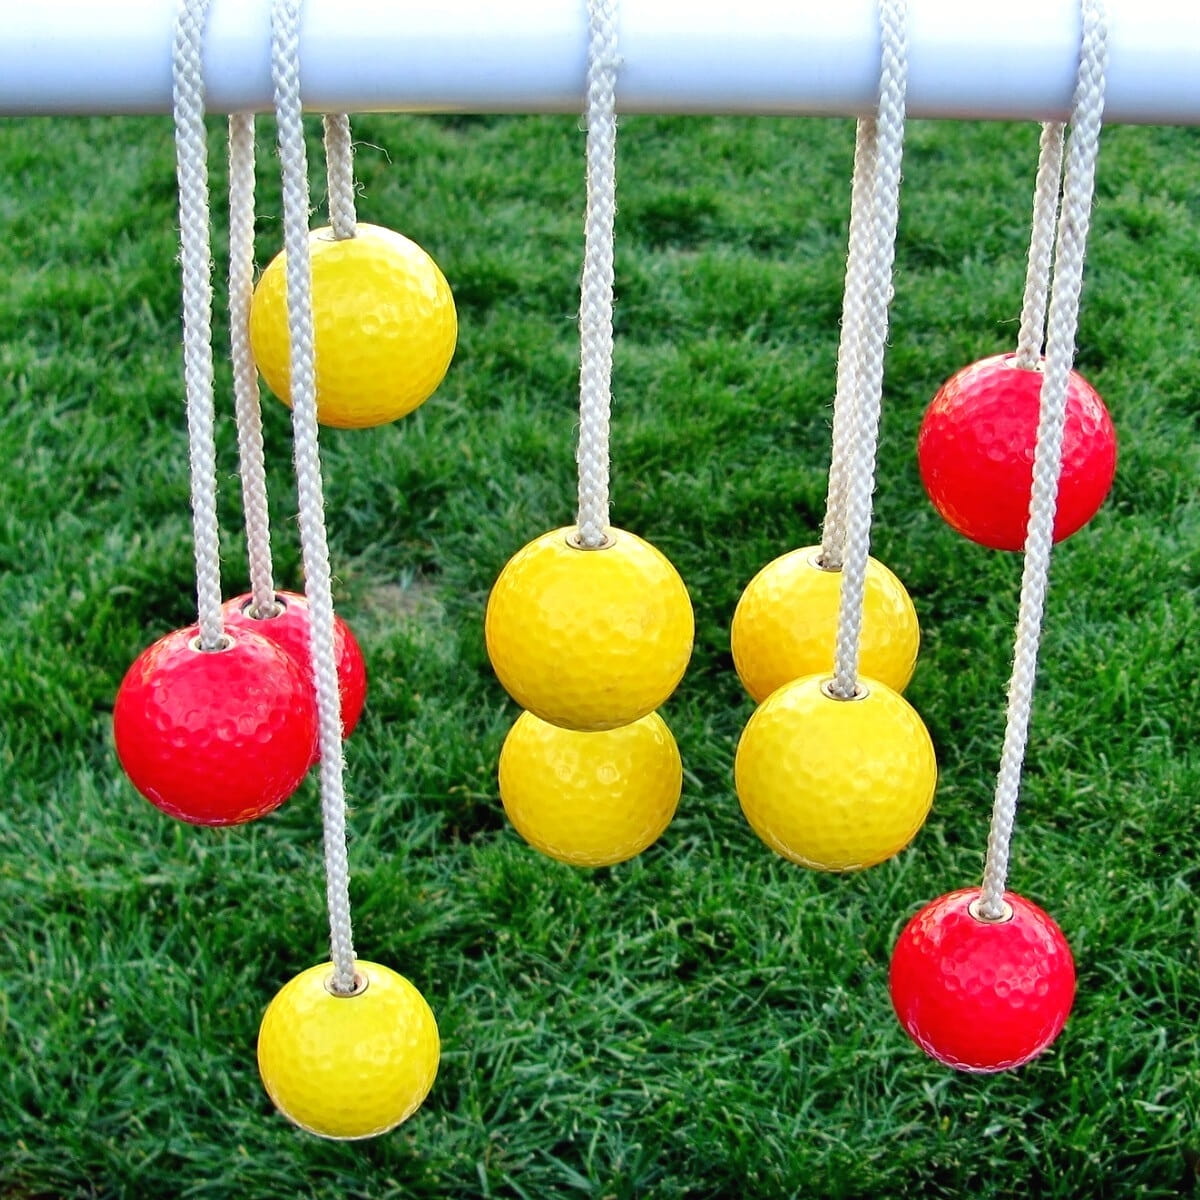 PVC ladder ball set with colorful bolas